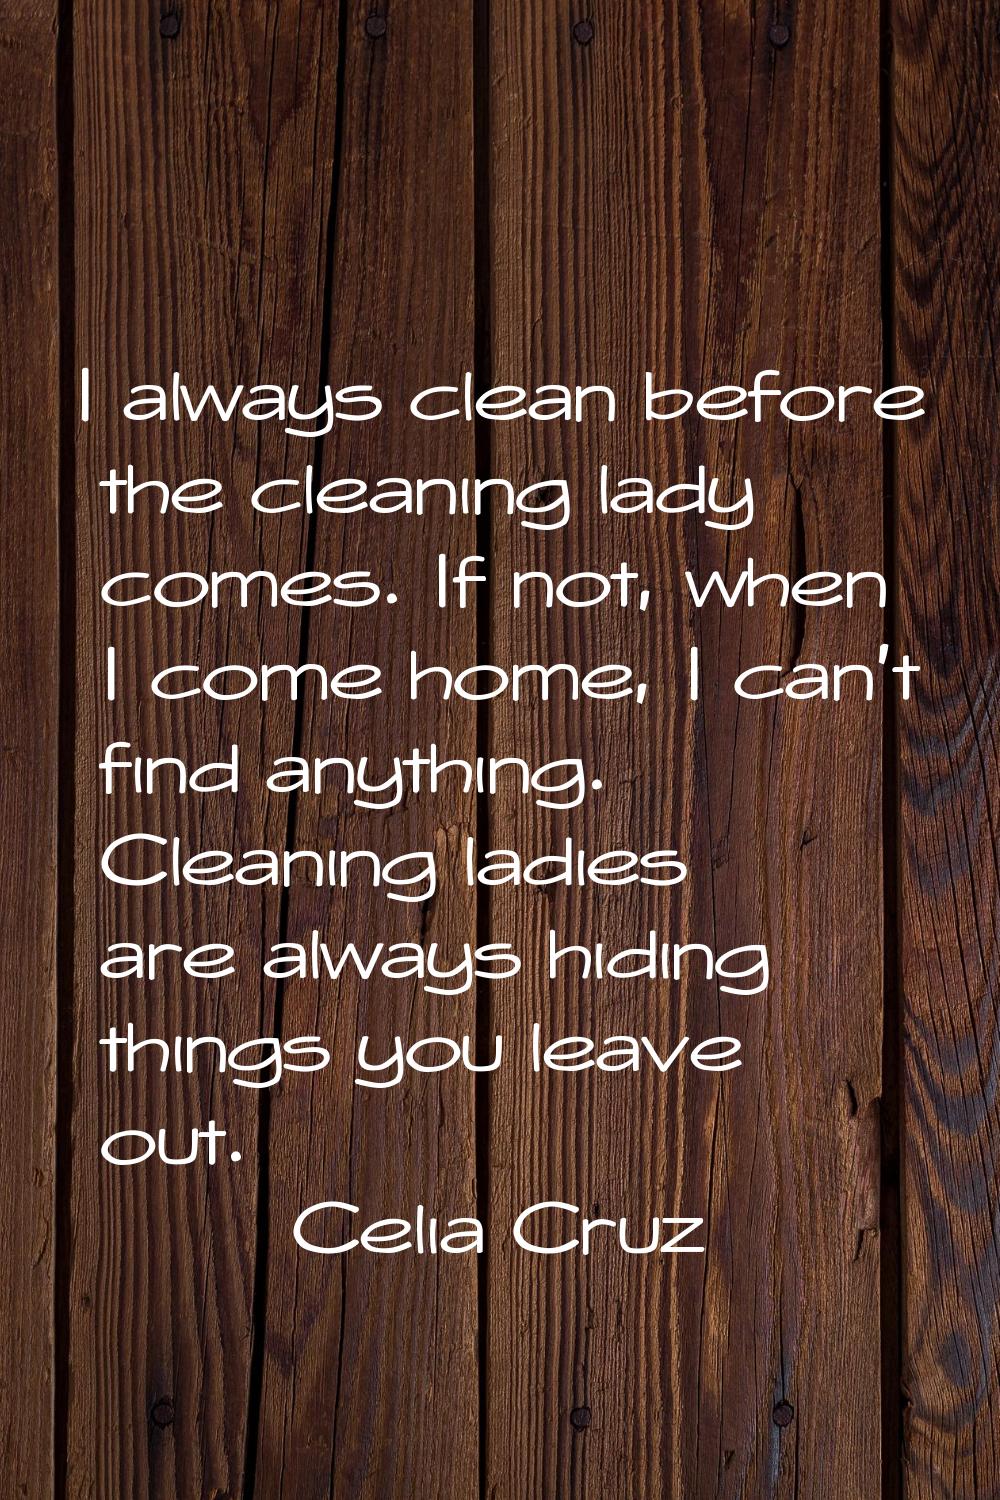 I always clean before the cleaning lady comes. If not, when I come home, I can't find anything. Cle